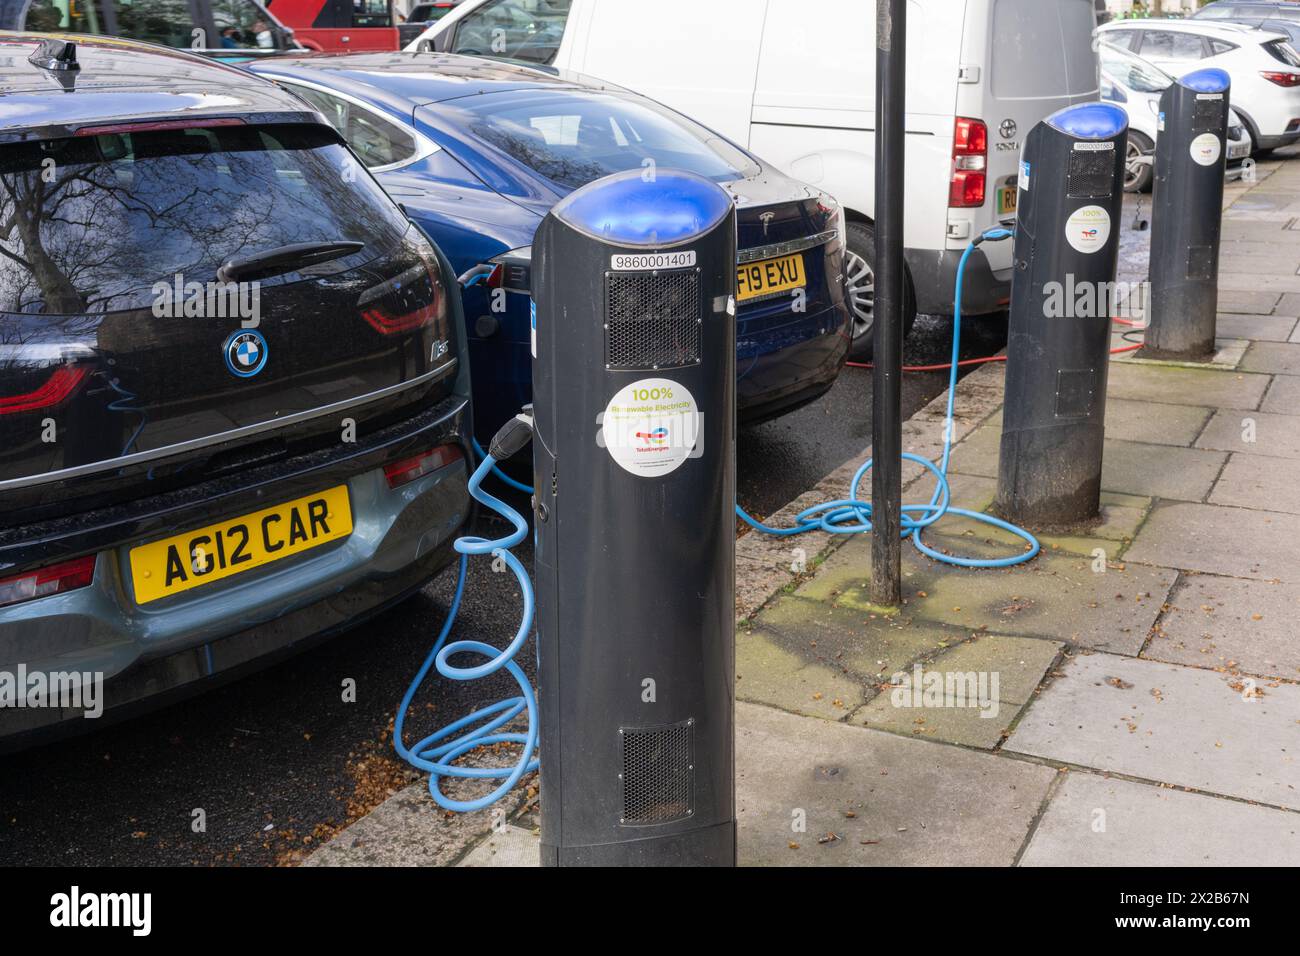 Electric cars - a BMW i3 and a Tesla plugged in and charging - at a public network EV charging station provided by Source London. London, England Stock Photo